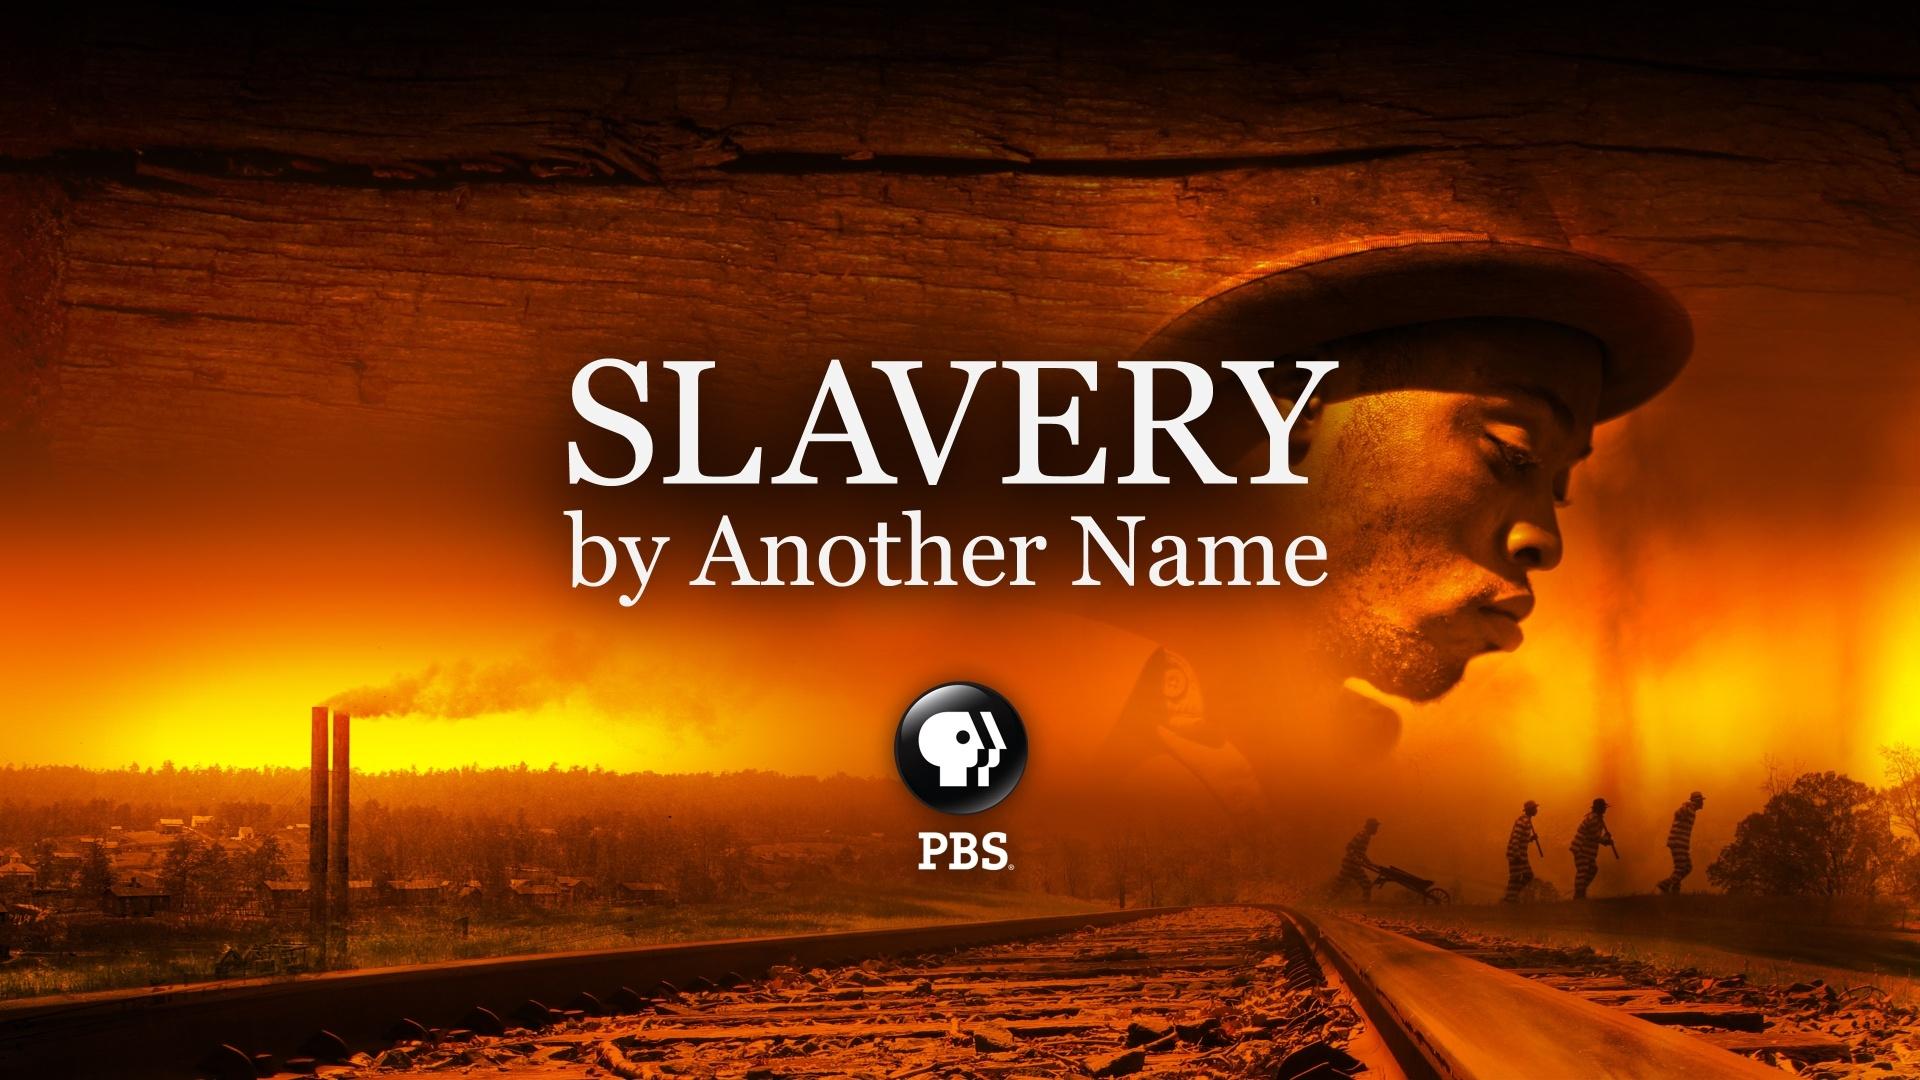 Slavery by Another Name Episode 1